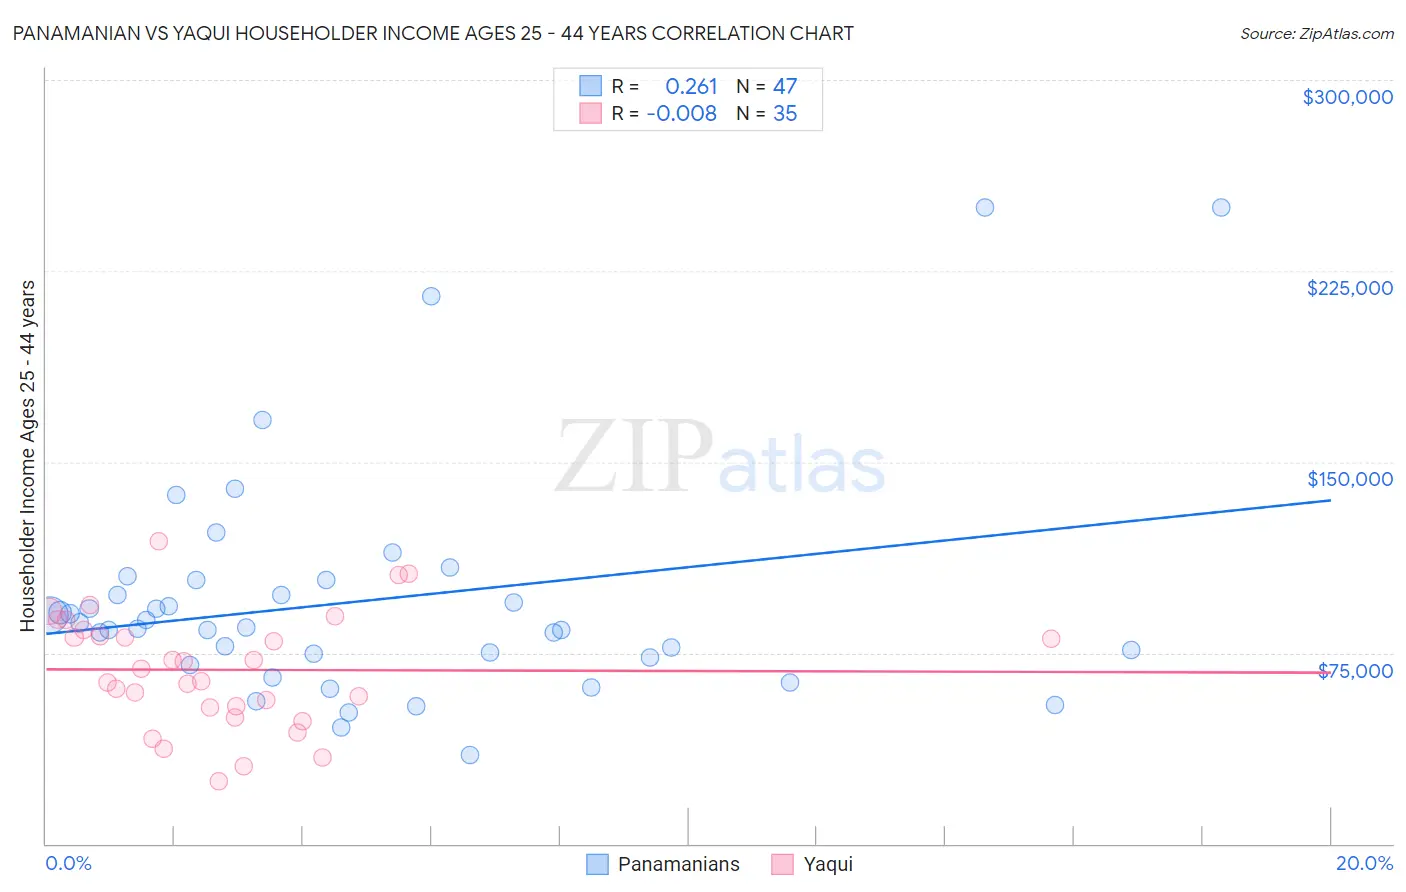 Panamanian vs Yaqui Householder Income Ages 25 - 44 years